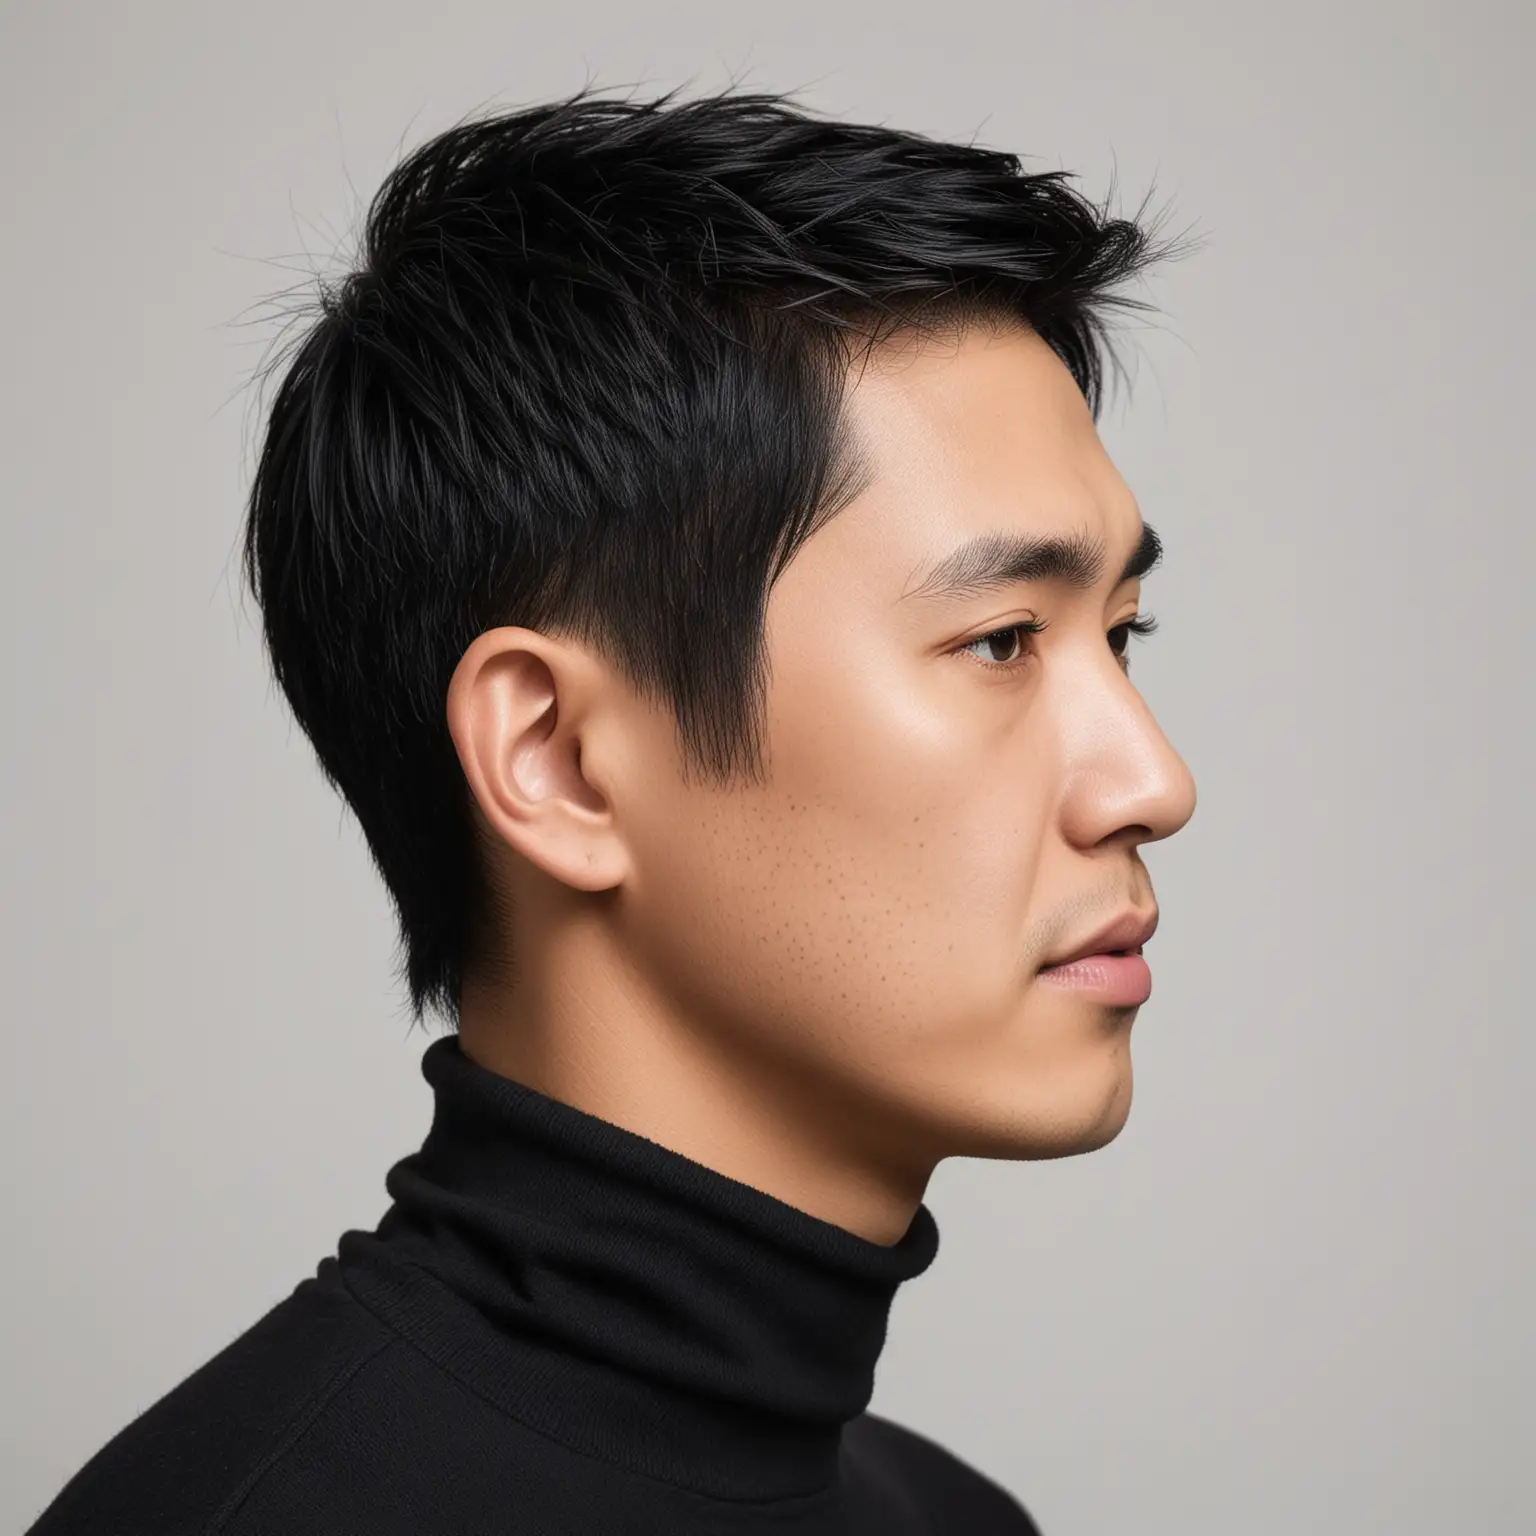 Side Profile Portrait of Asian Man with Short Black Hair and Black Turtleneck on White Background